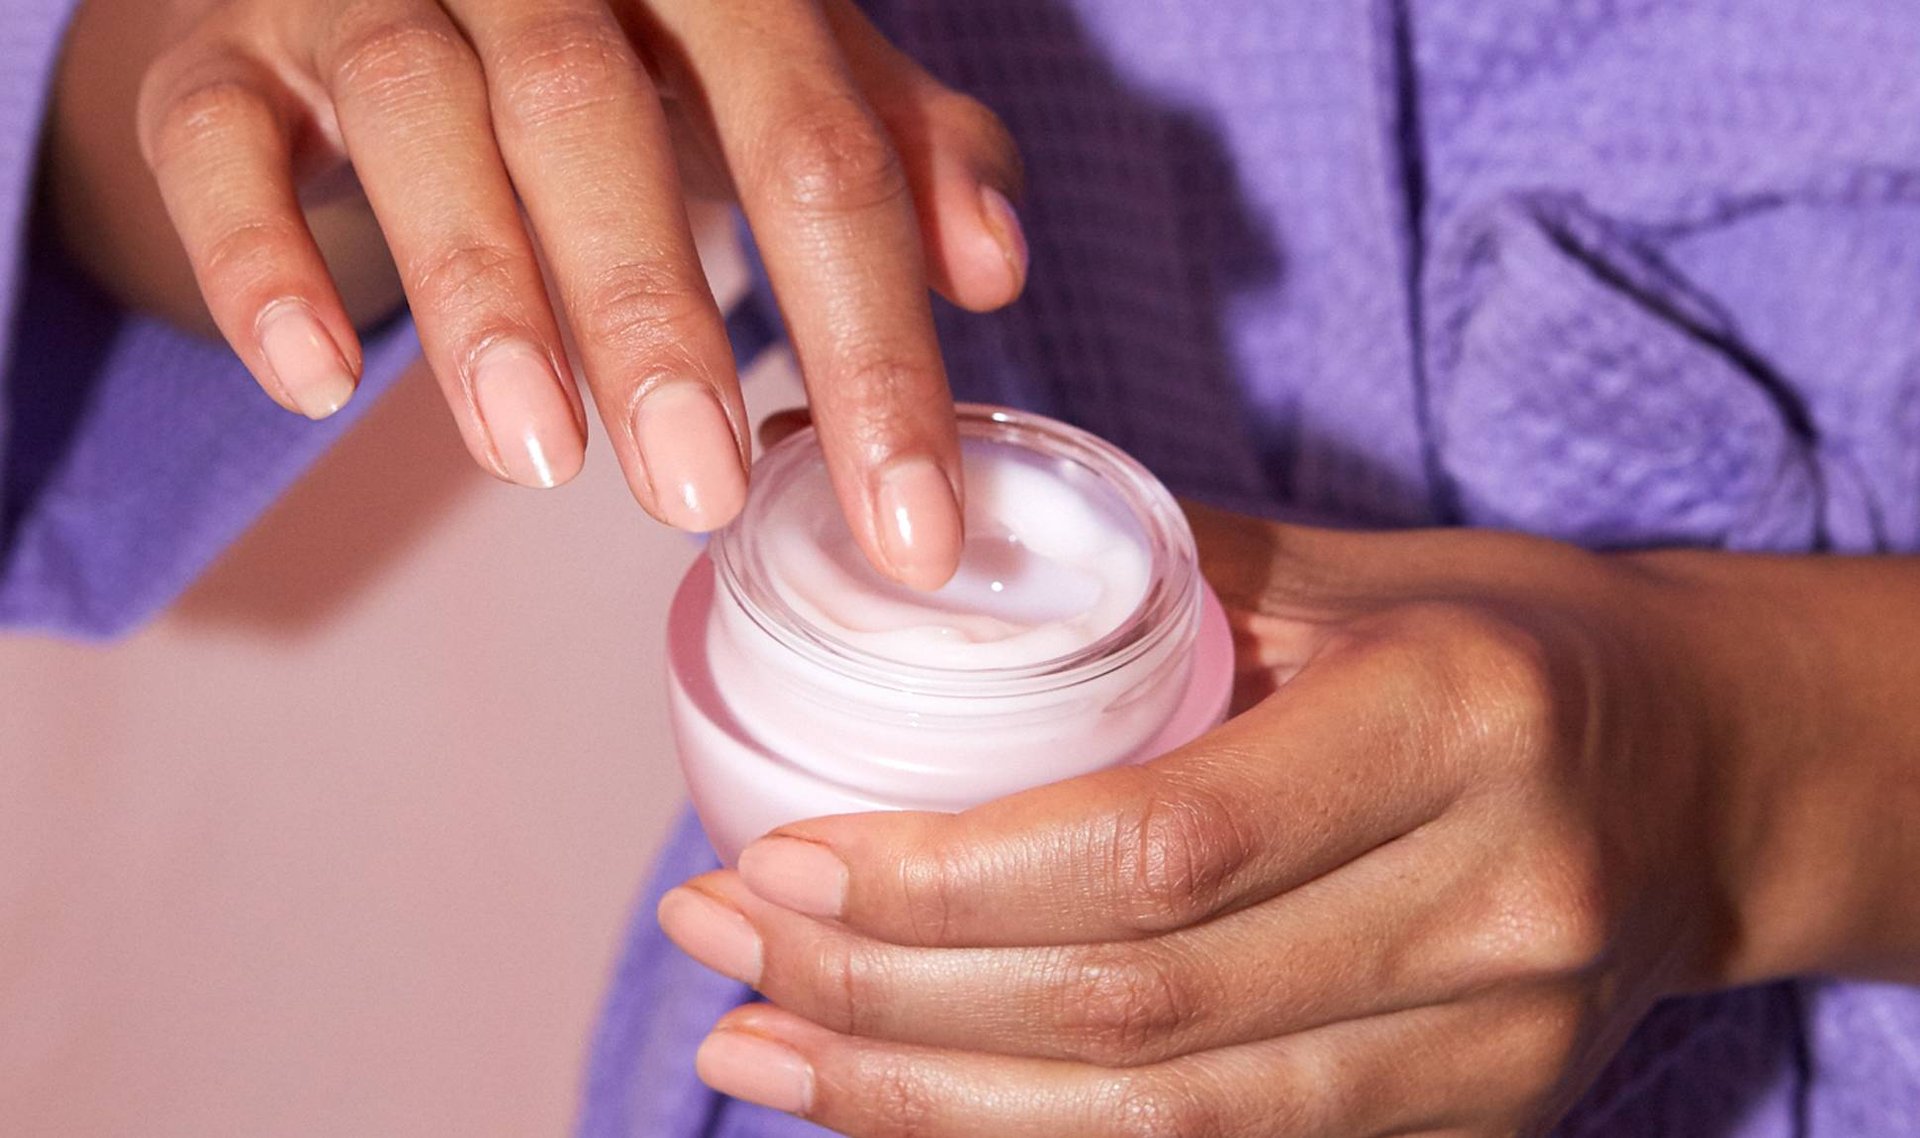 How Sanitary Are Beauty Products in Jars?